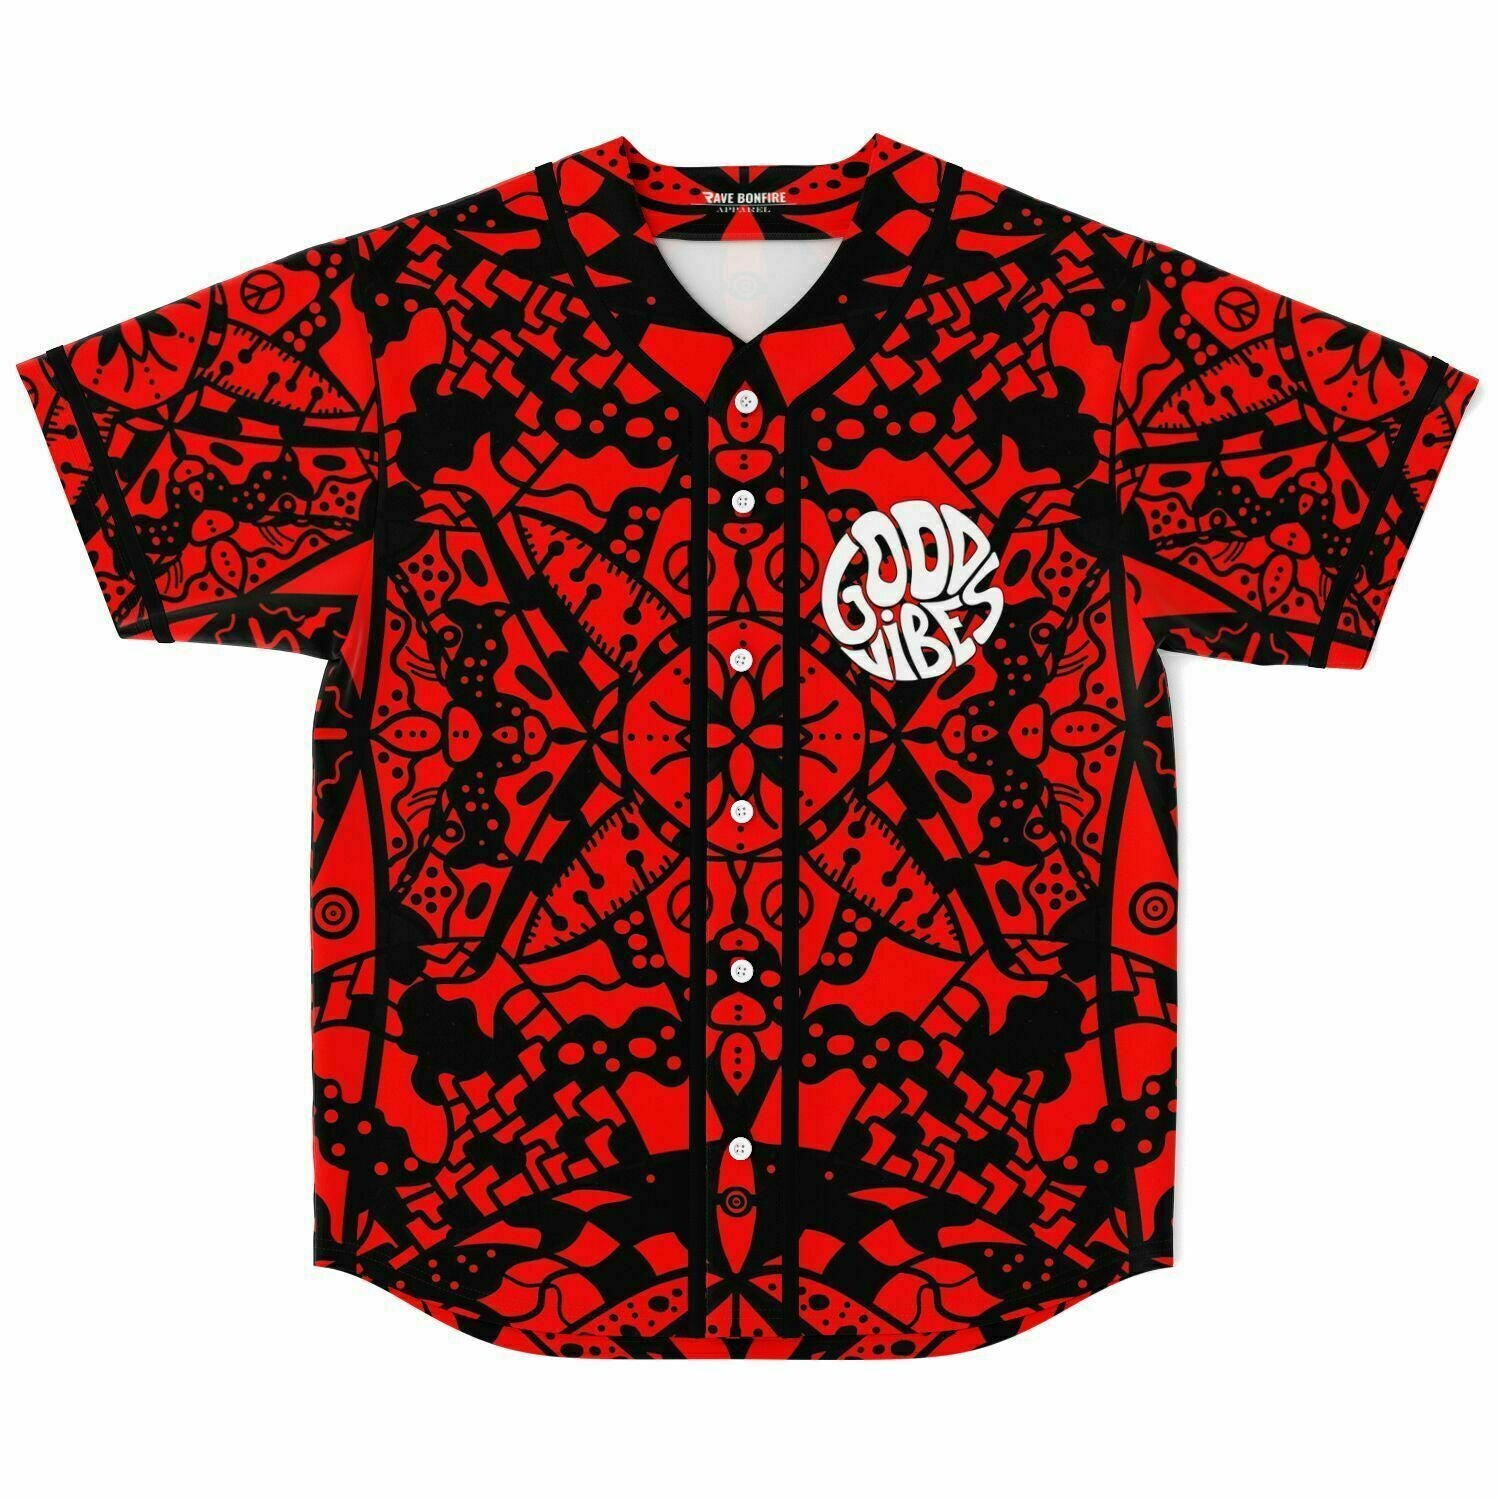 a red Custom Baseball jersey with black and white Good vibes print